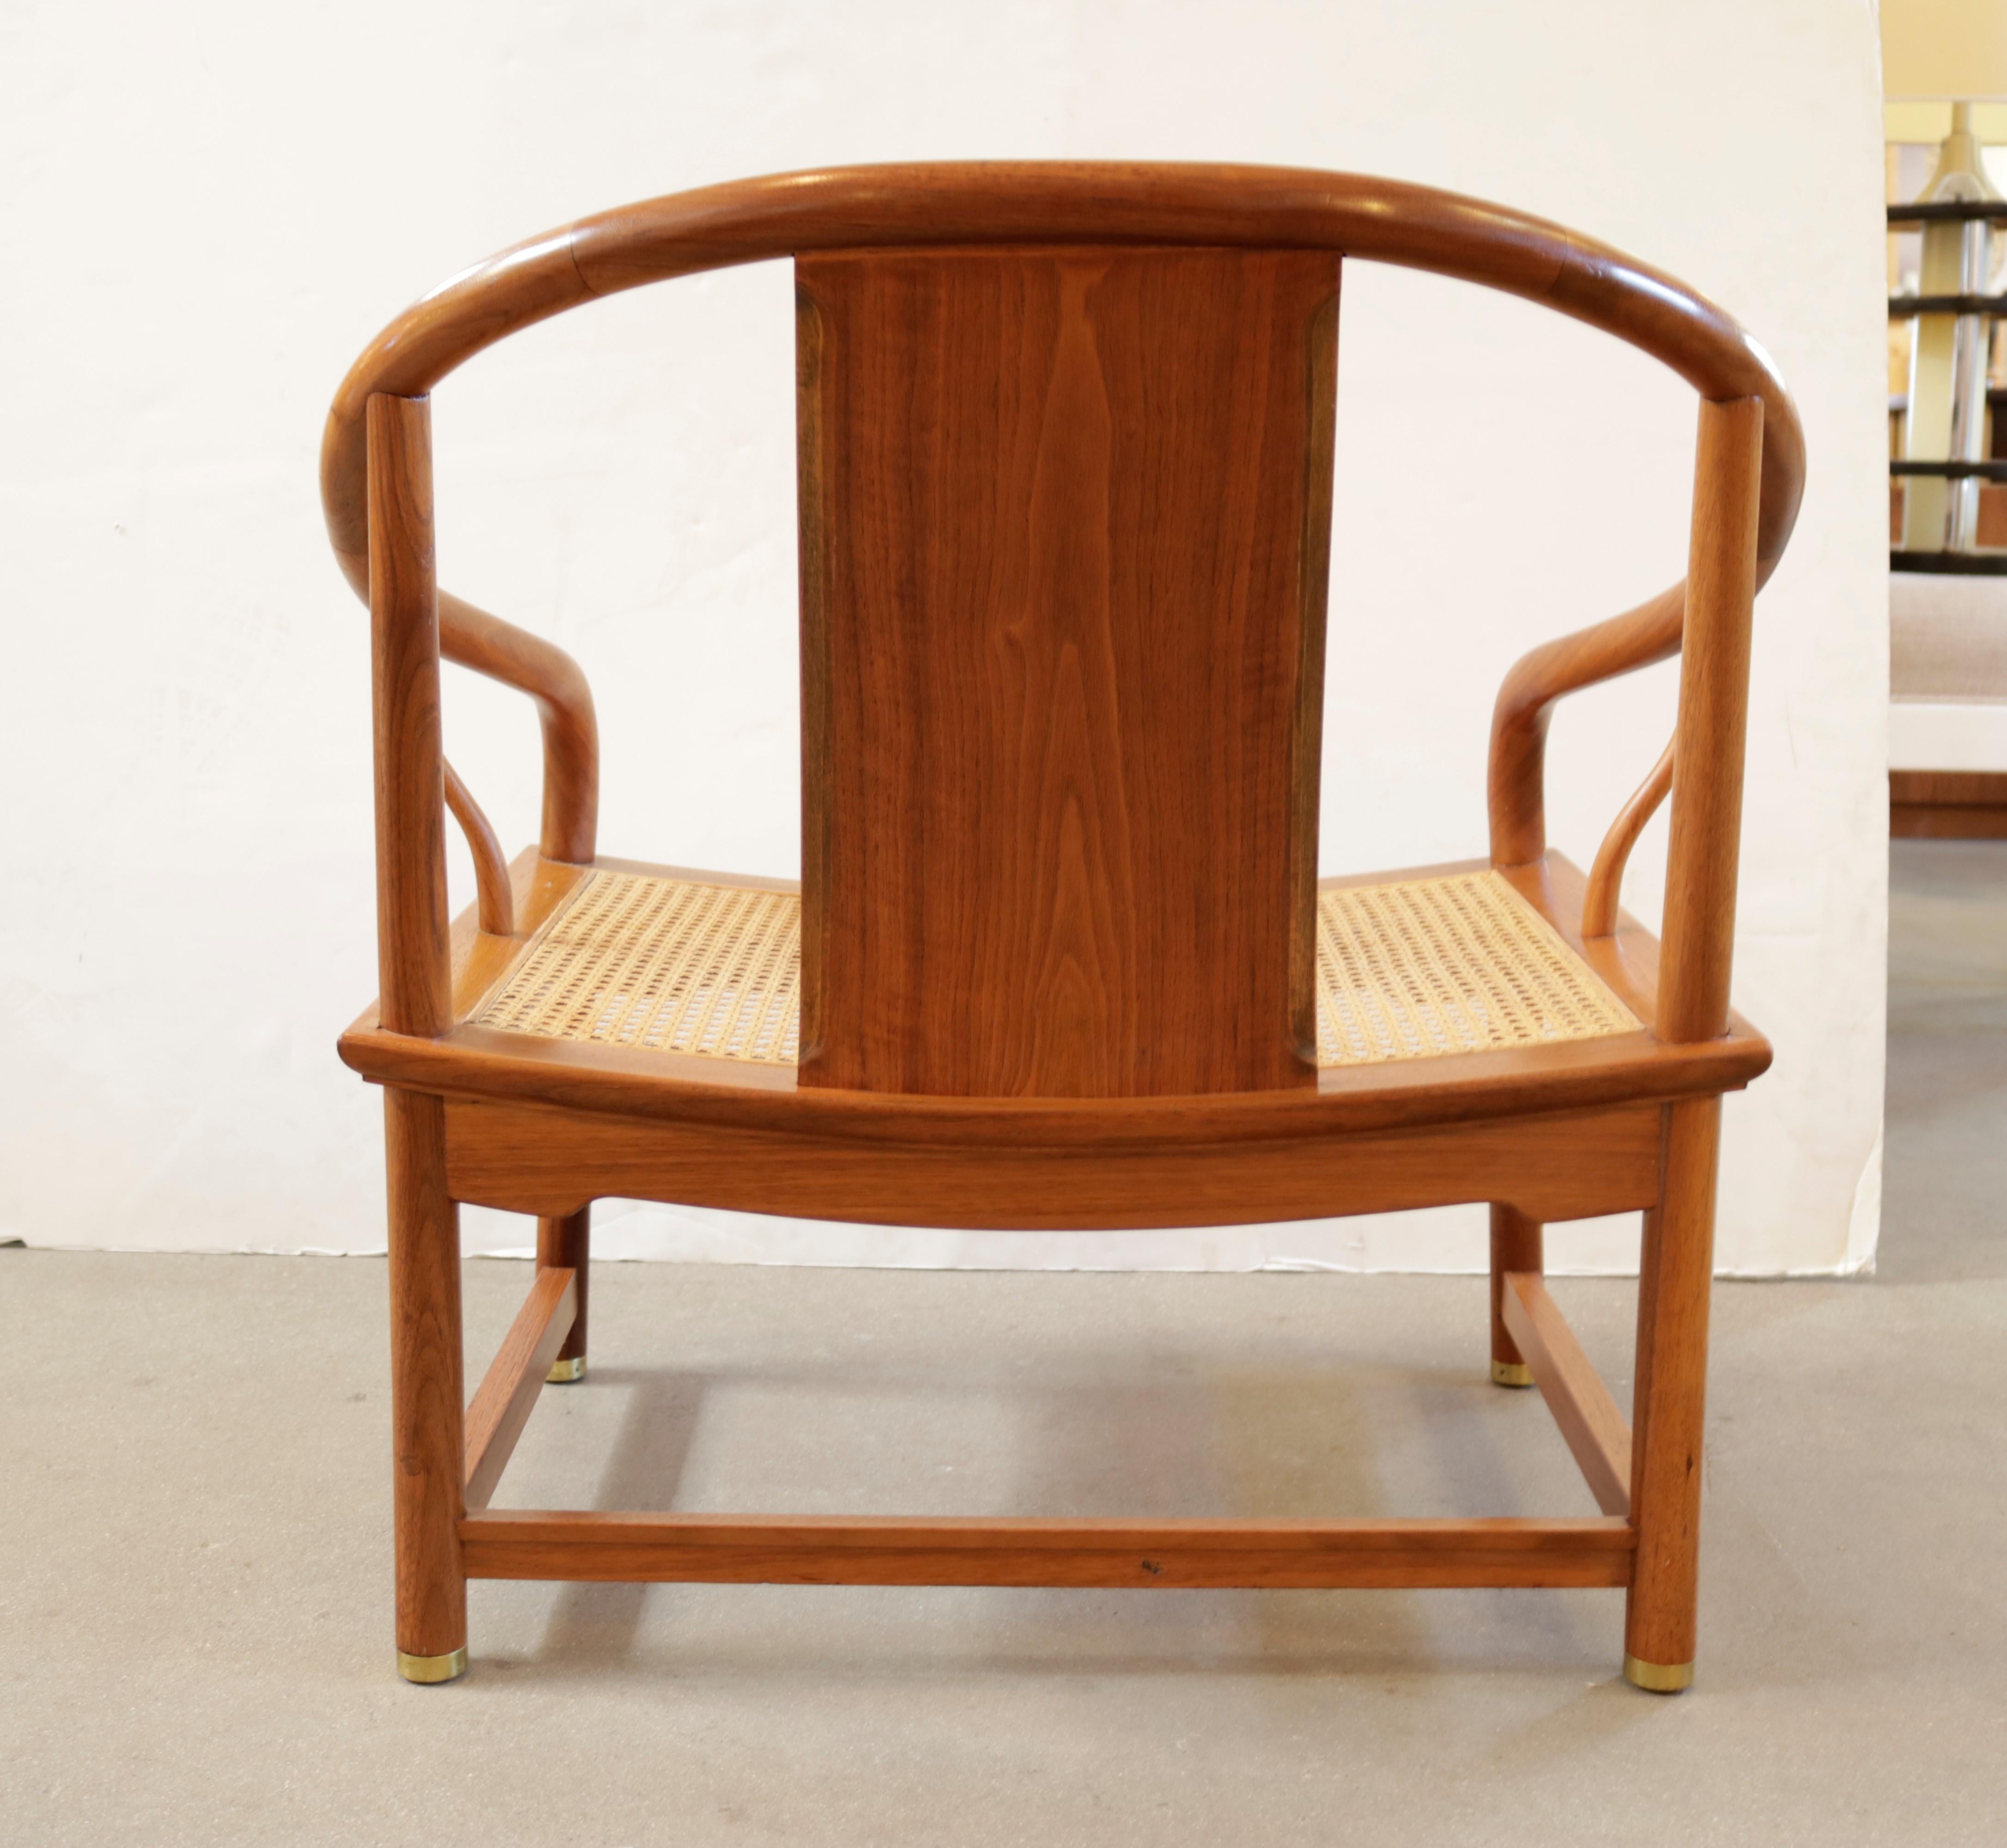 Horseshoe shape caned chair made of blond mahogany by designer Michael Taylor's for Baker Furniture. 
The chair retains the original Baker label.

Michael Taylor was an American designer best known for creating the “California Look” of interior